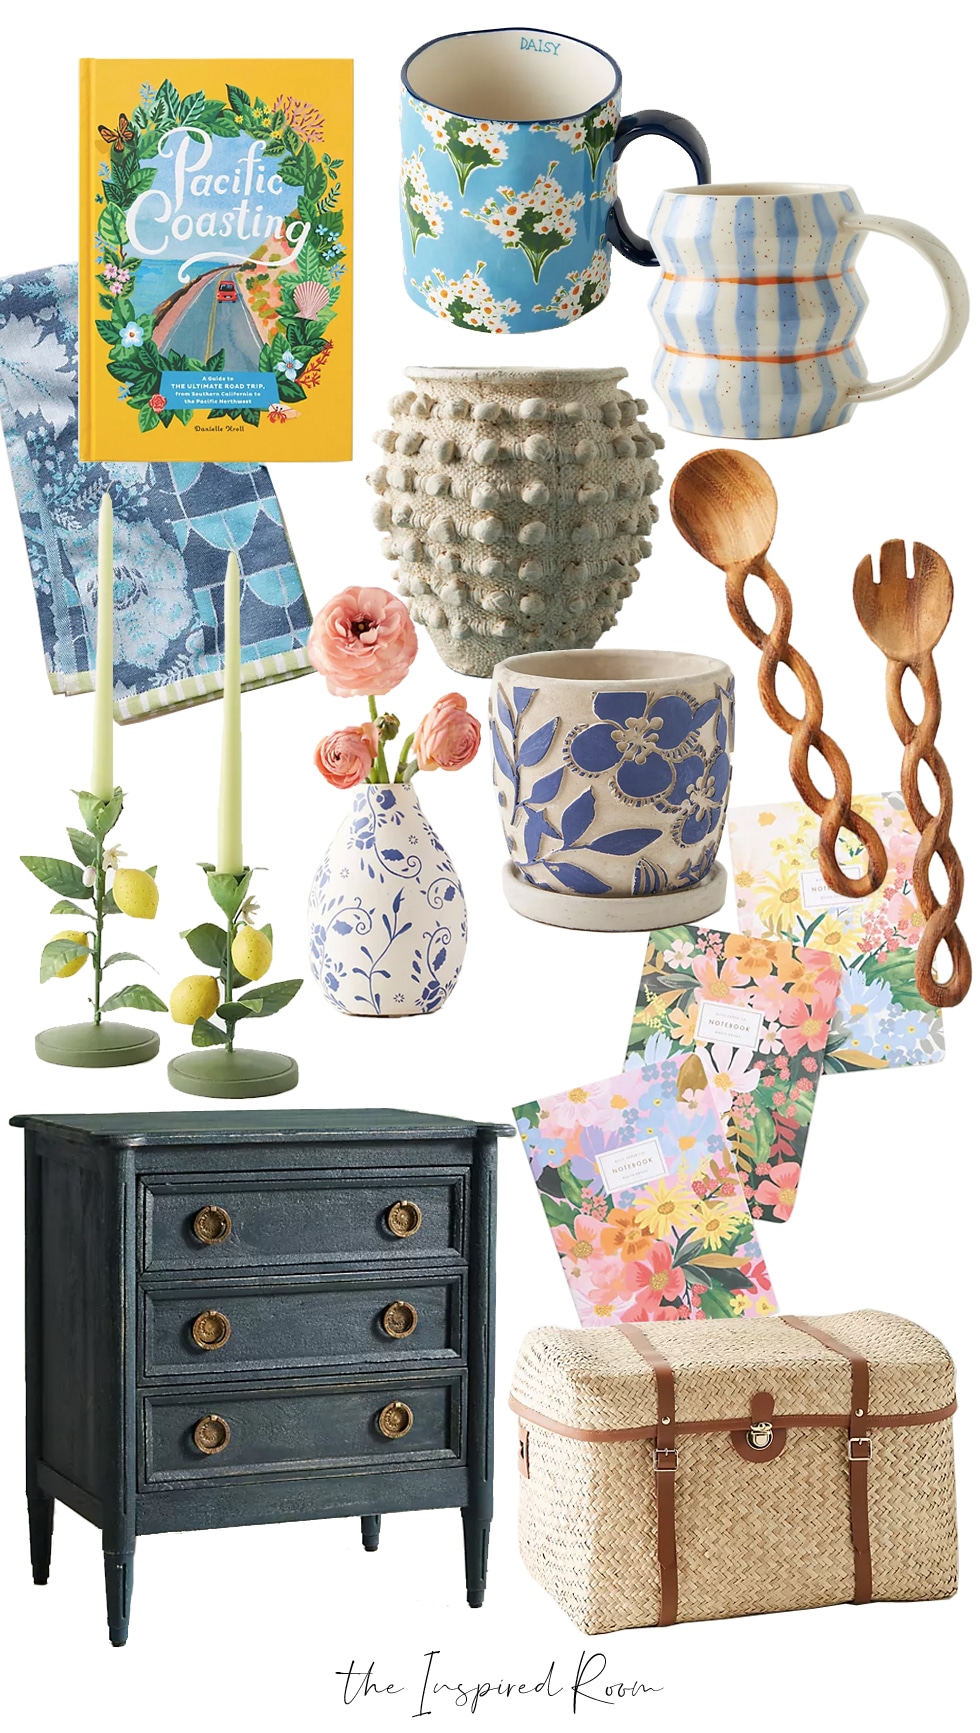 5 Simple Ways to Decorate for Spring